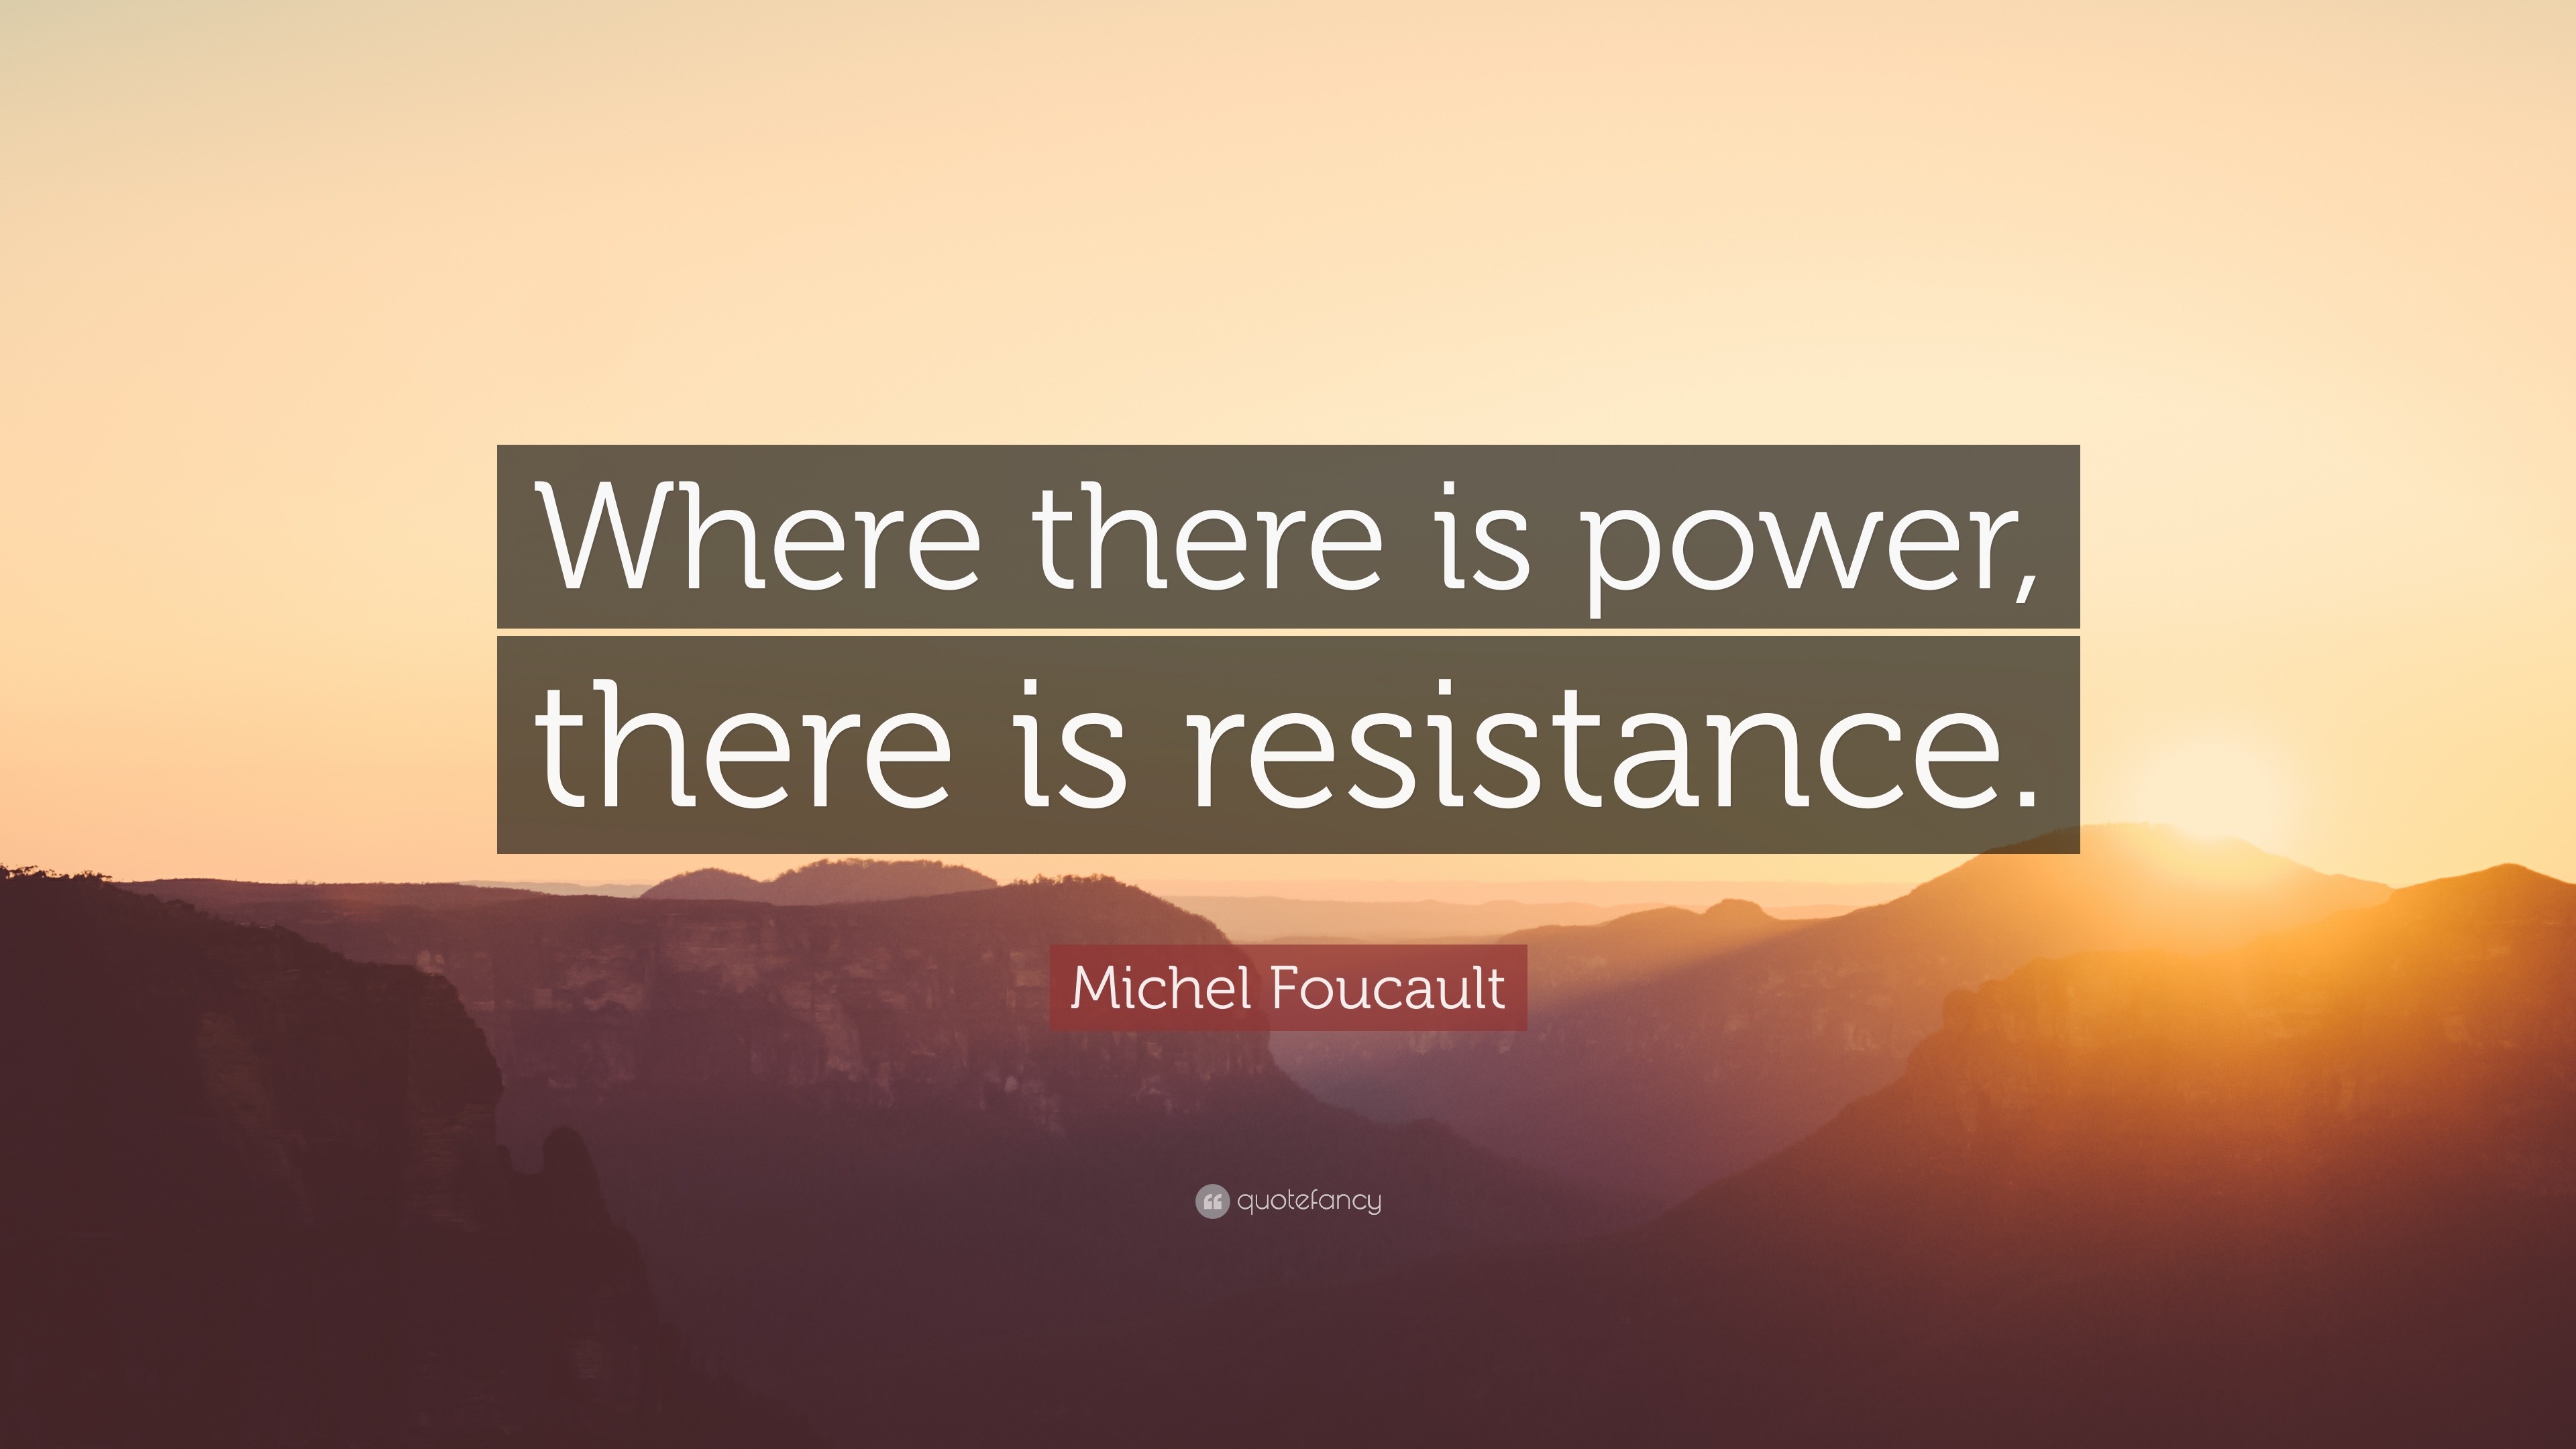 Michel Foucault Quote: “Where there is power, there is resistance.”